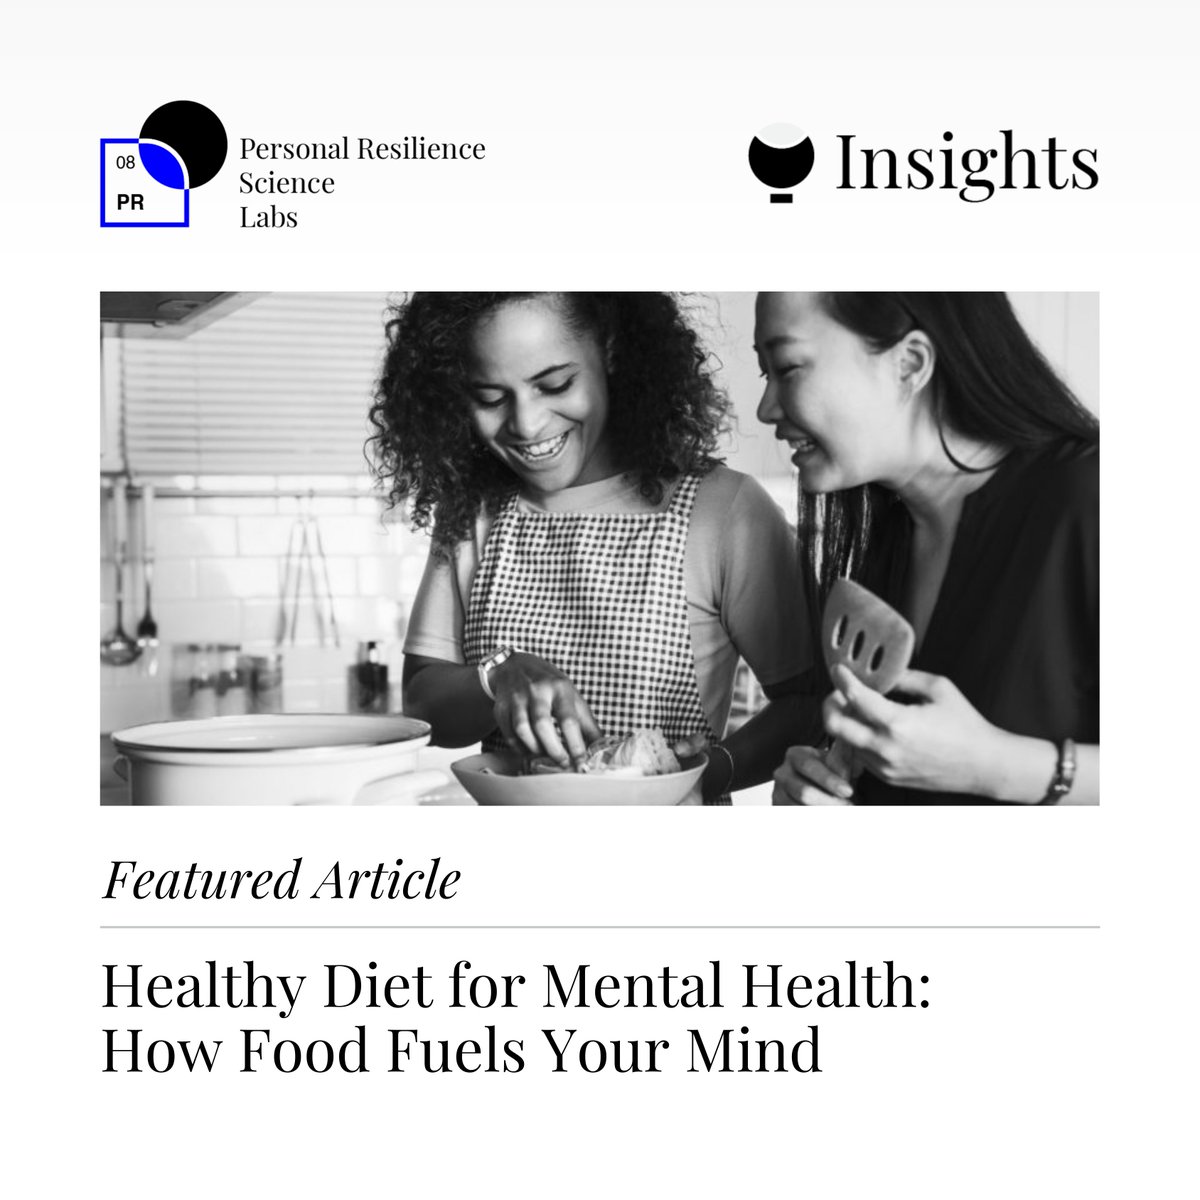 Reports suggest that these generations are experiencing higher rates of poor mental health. Full article, link in bio!
#LMSL #LifeManagementScienceLabs #LifeManagementScience #PersonalResilienceScienceLabs #InsightMagazine #PersonalResilience #Resilience #HealthyDiet #Diet